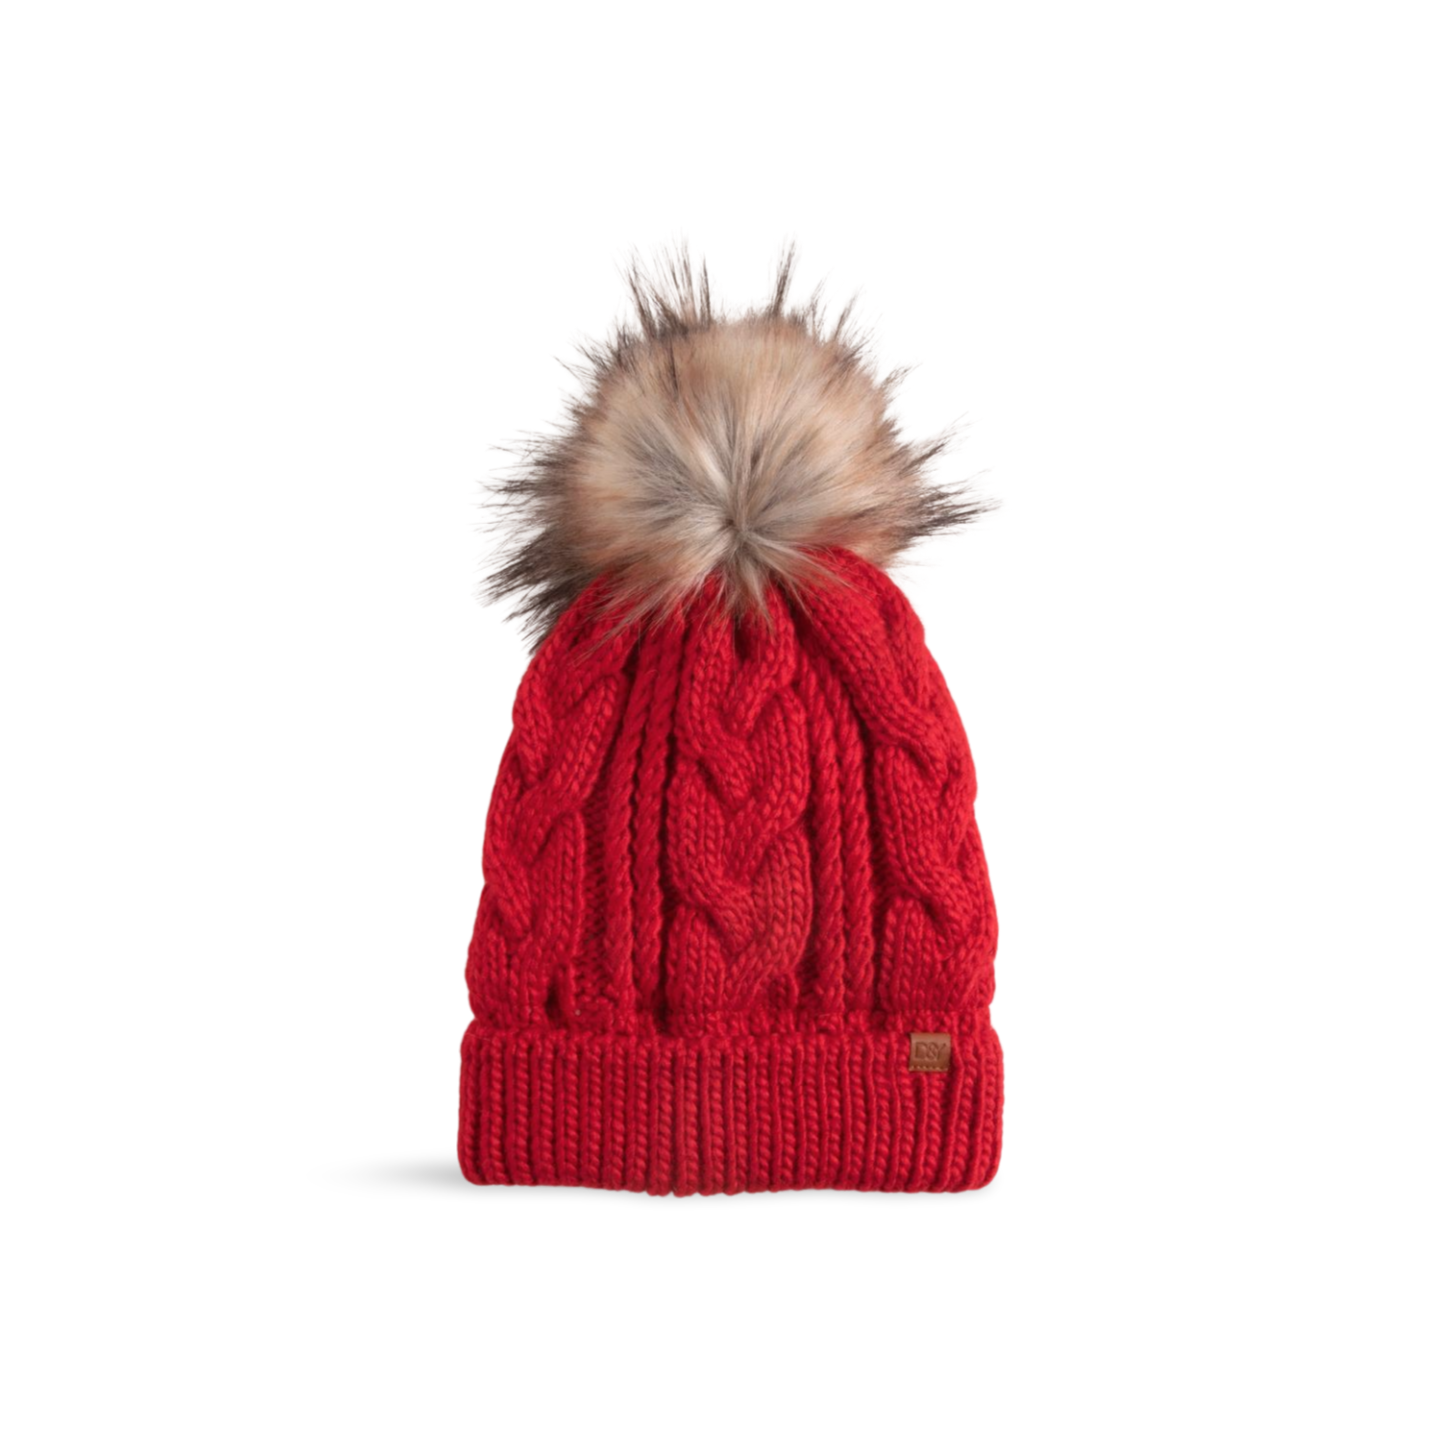 FSBB09061 - CABLE KNIT BEANIE WITH FAUX FUR POM AND SHERPA LINING